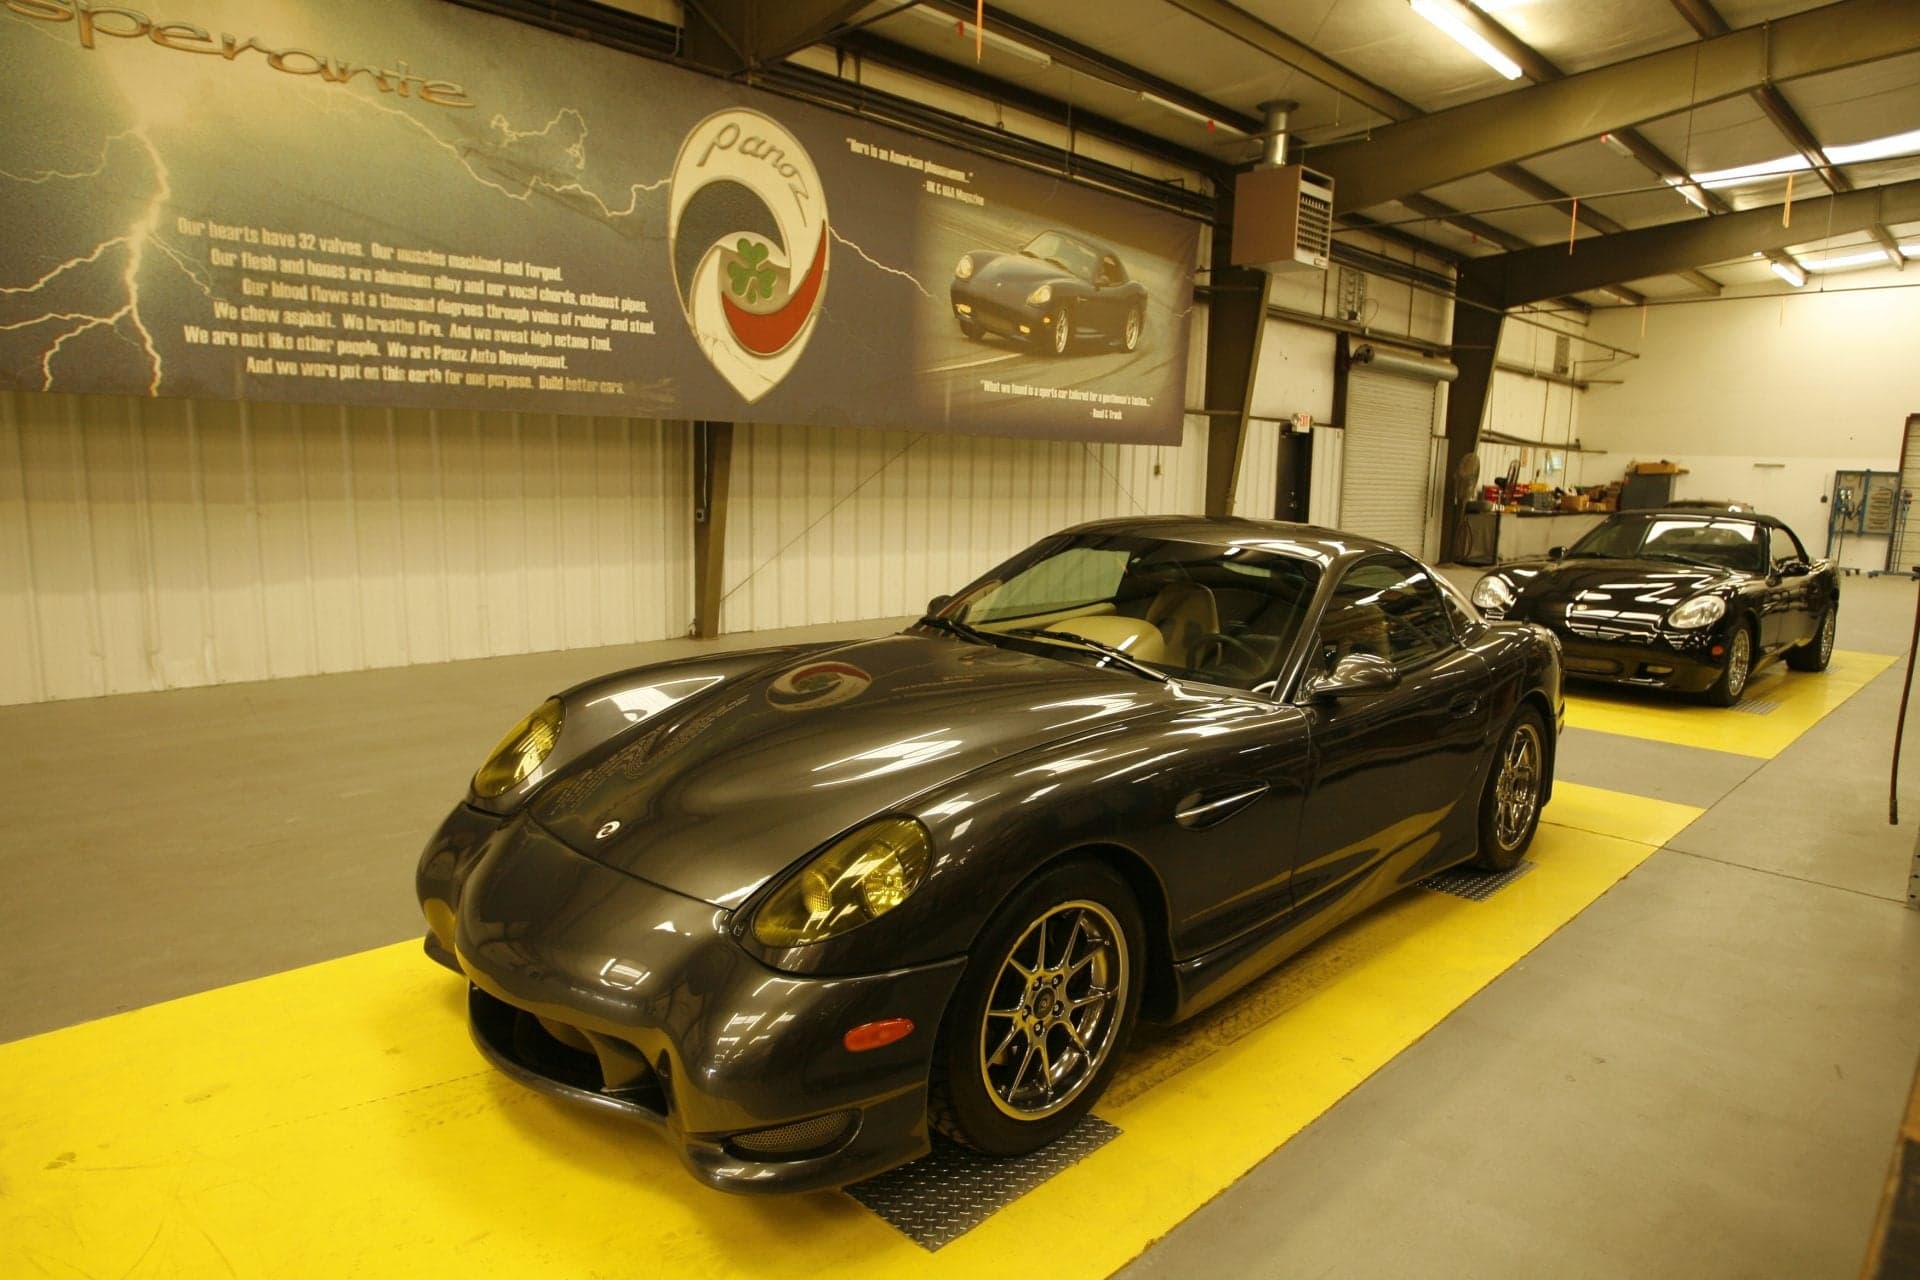 Panoz to Use New Self-Healing Paint on Its Cars